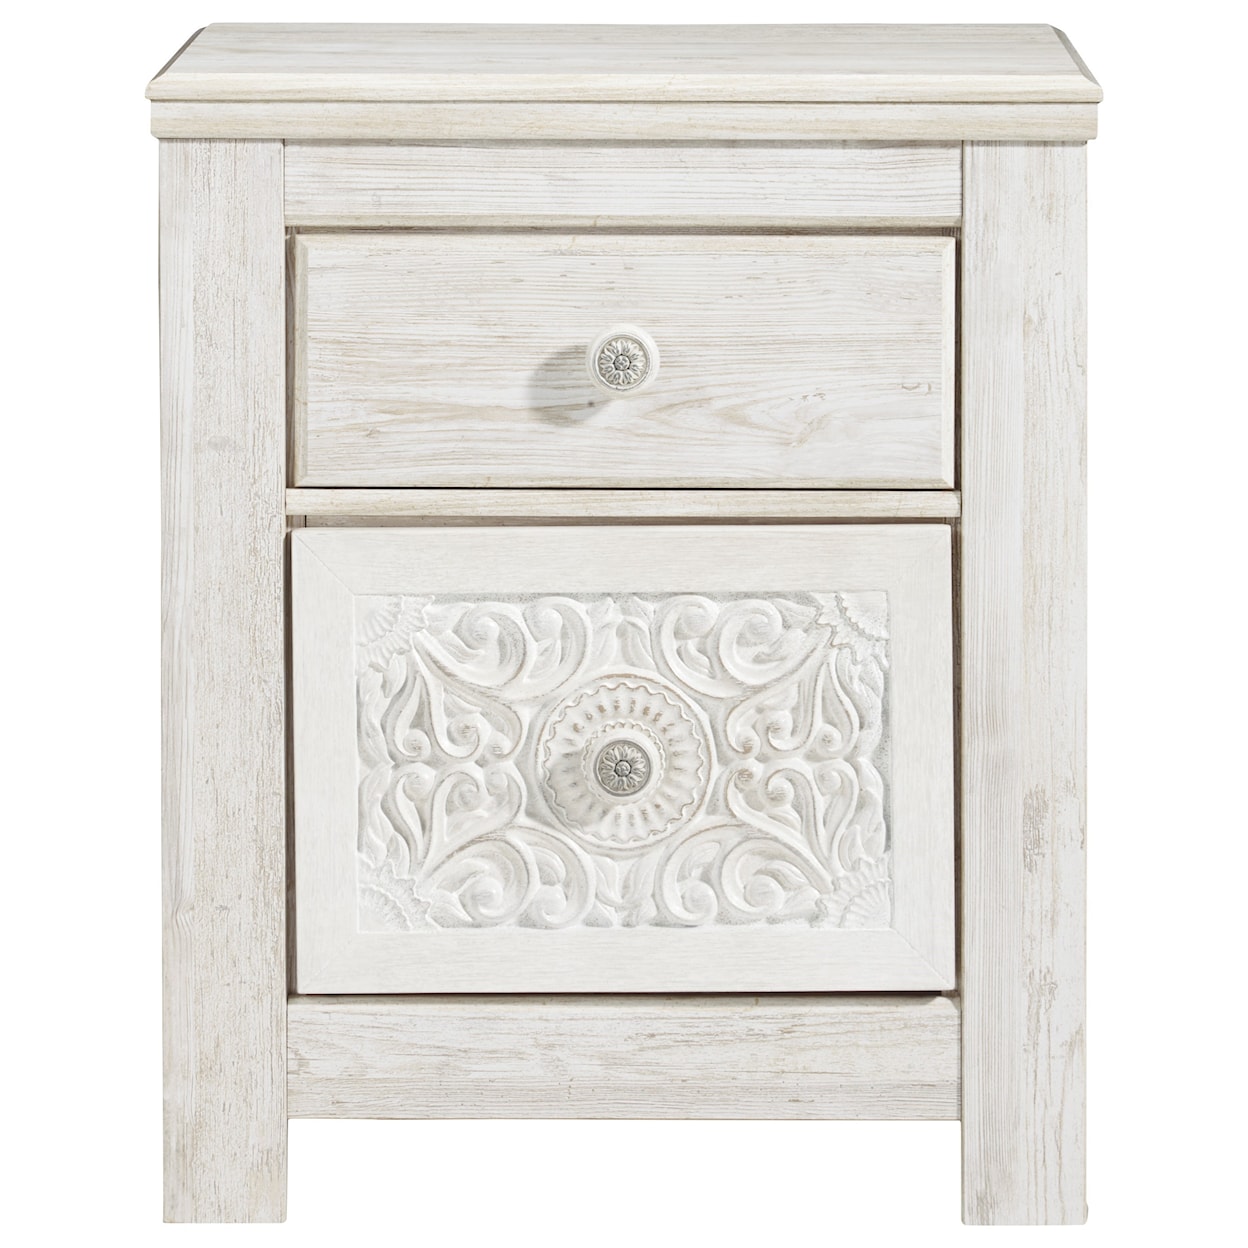 Signature Design by Ashley Paxberry 2 Drawer Nightstand